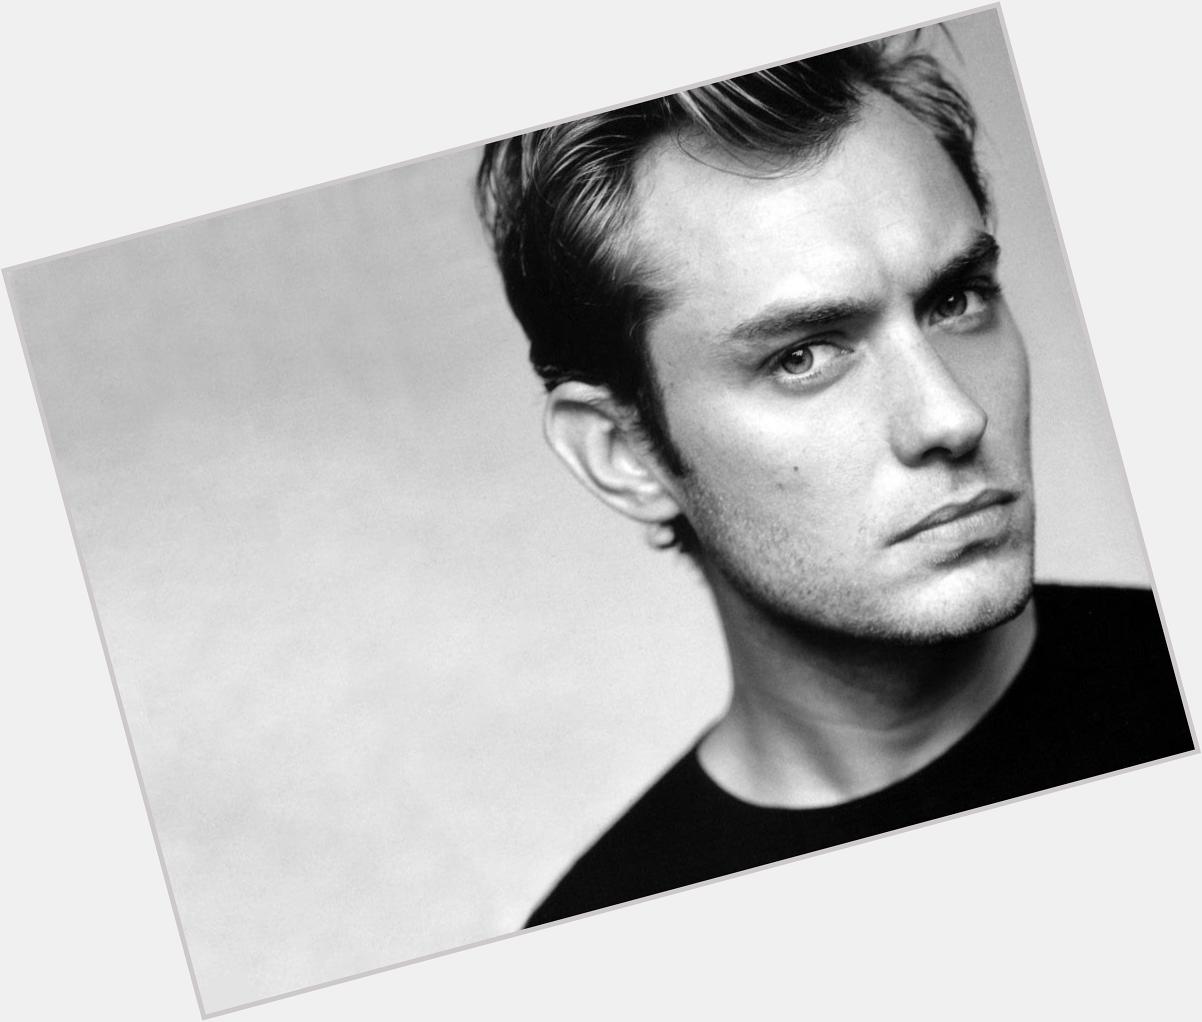 Happy Birthday to Jude Law! One of the most stylish Englishmen out there! 